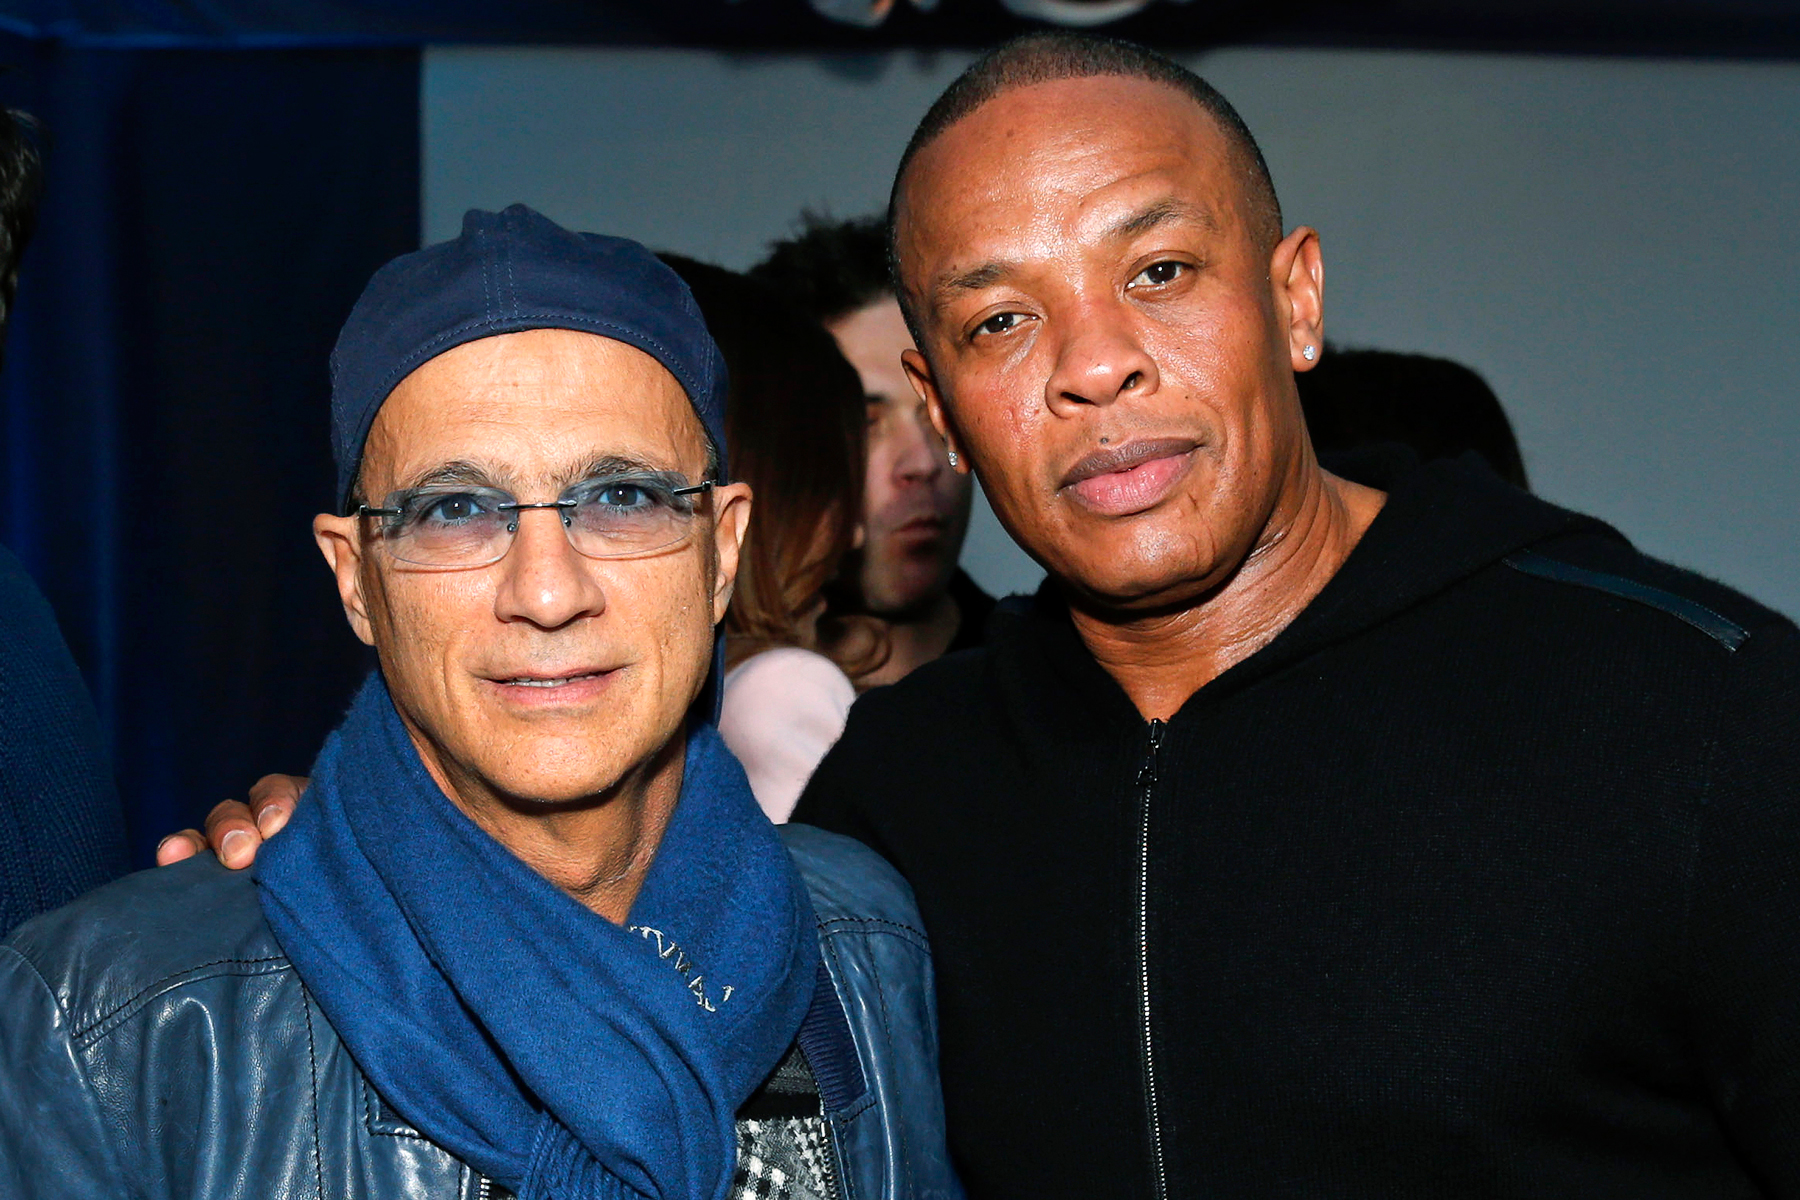 Jimmy Iovine and Dr. Dre Are Opening a High School in Los Angeles